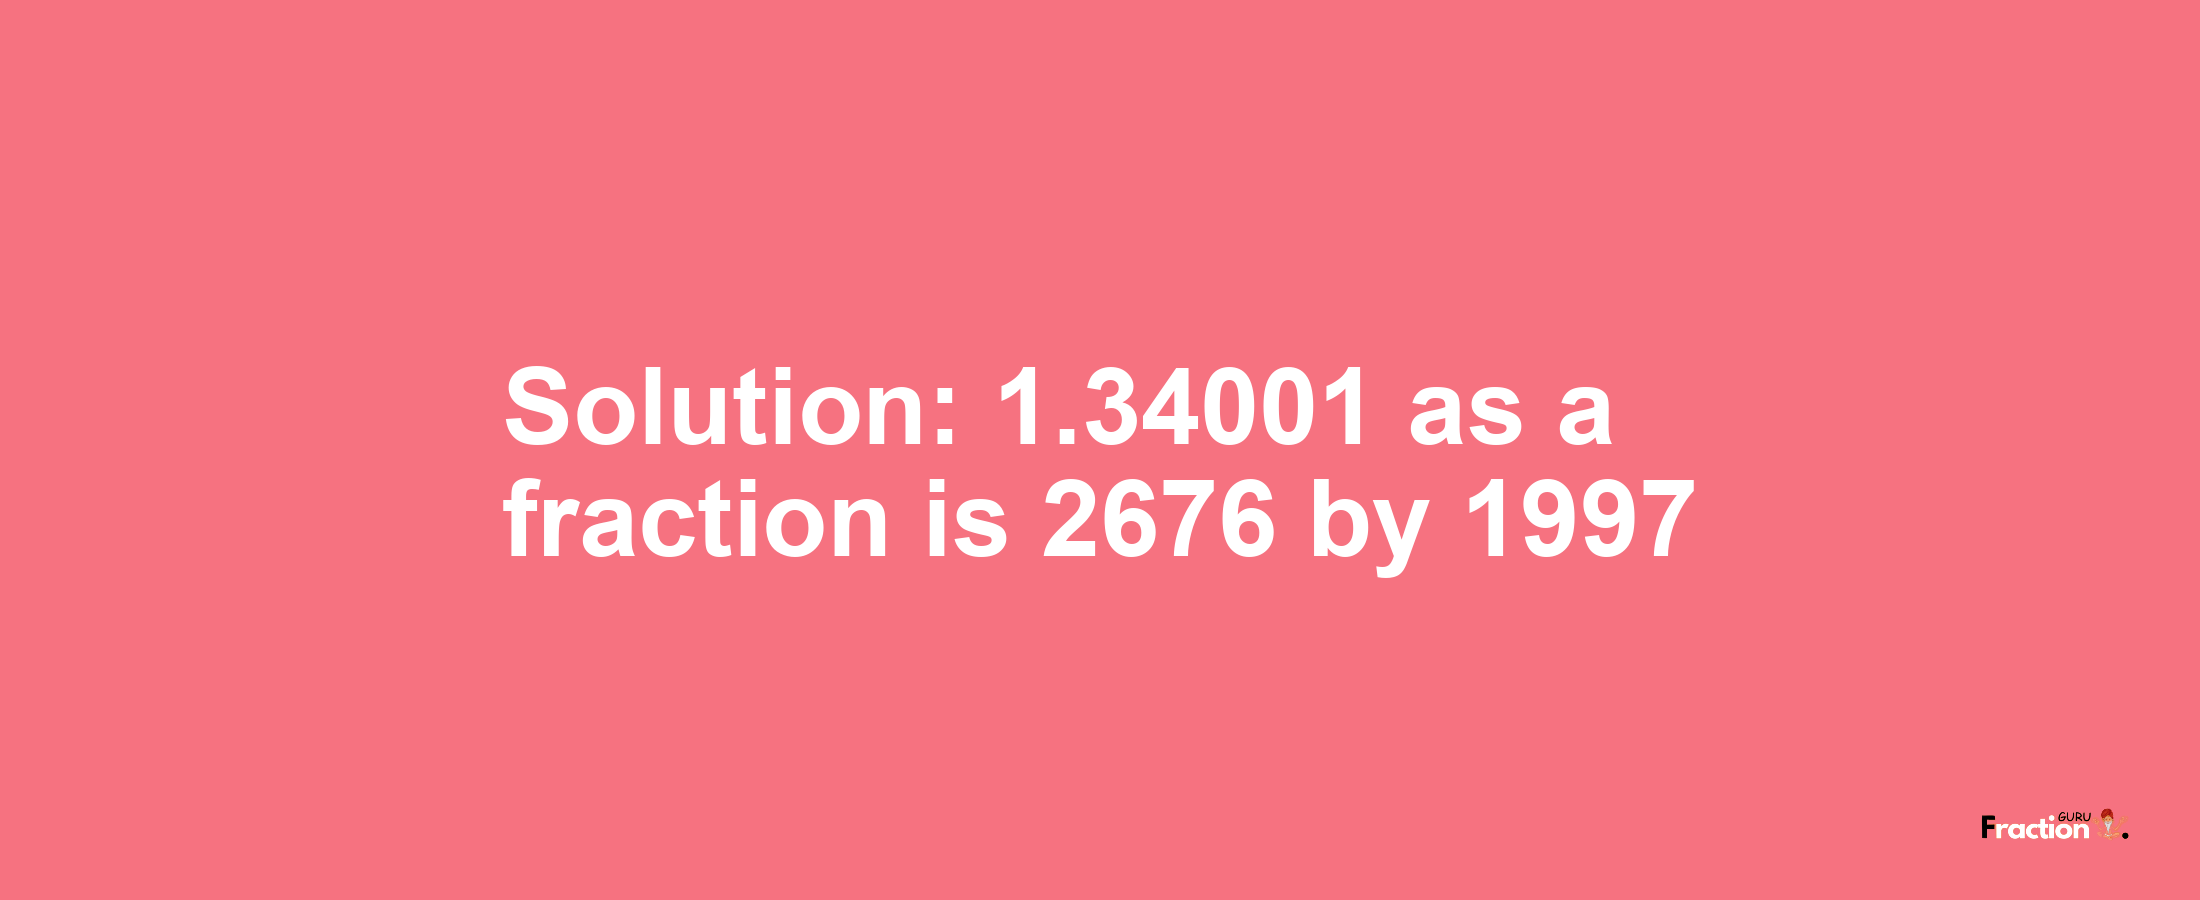 Solution:1.34001 as a fraction is 2676/1997